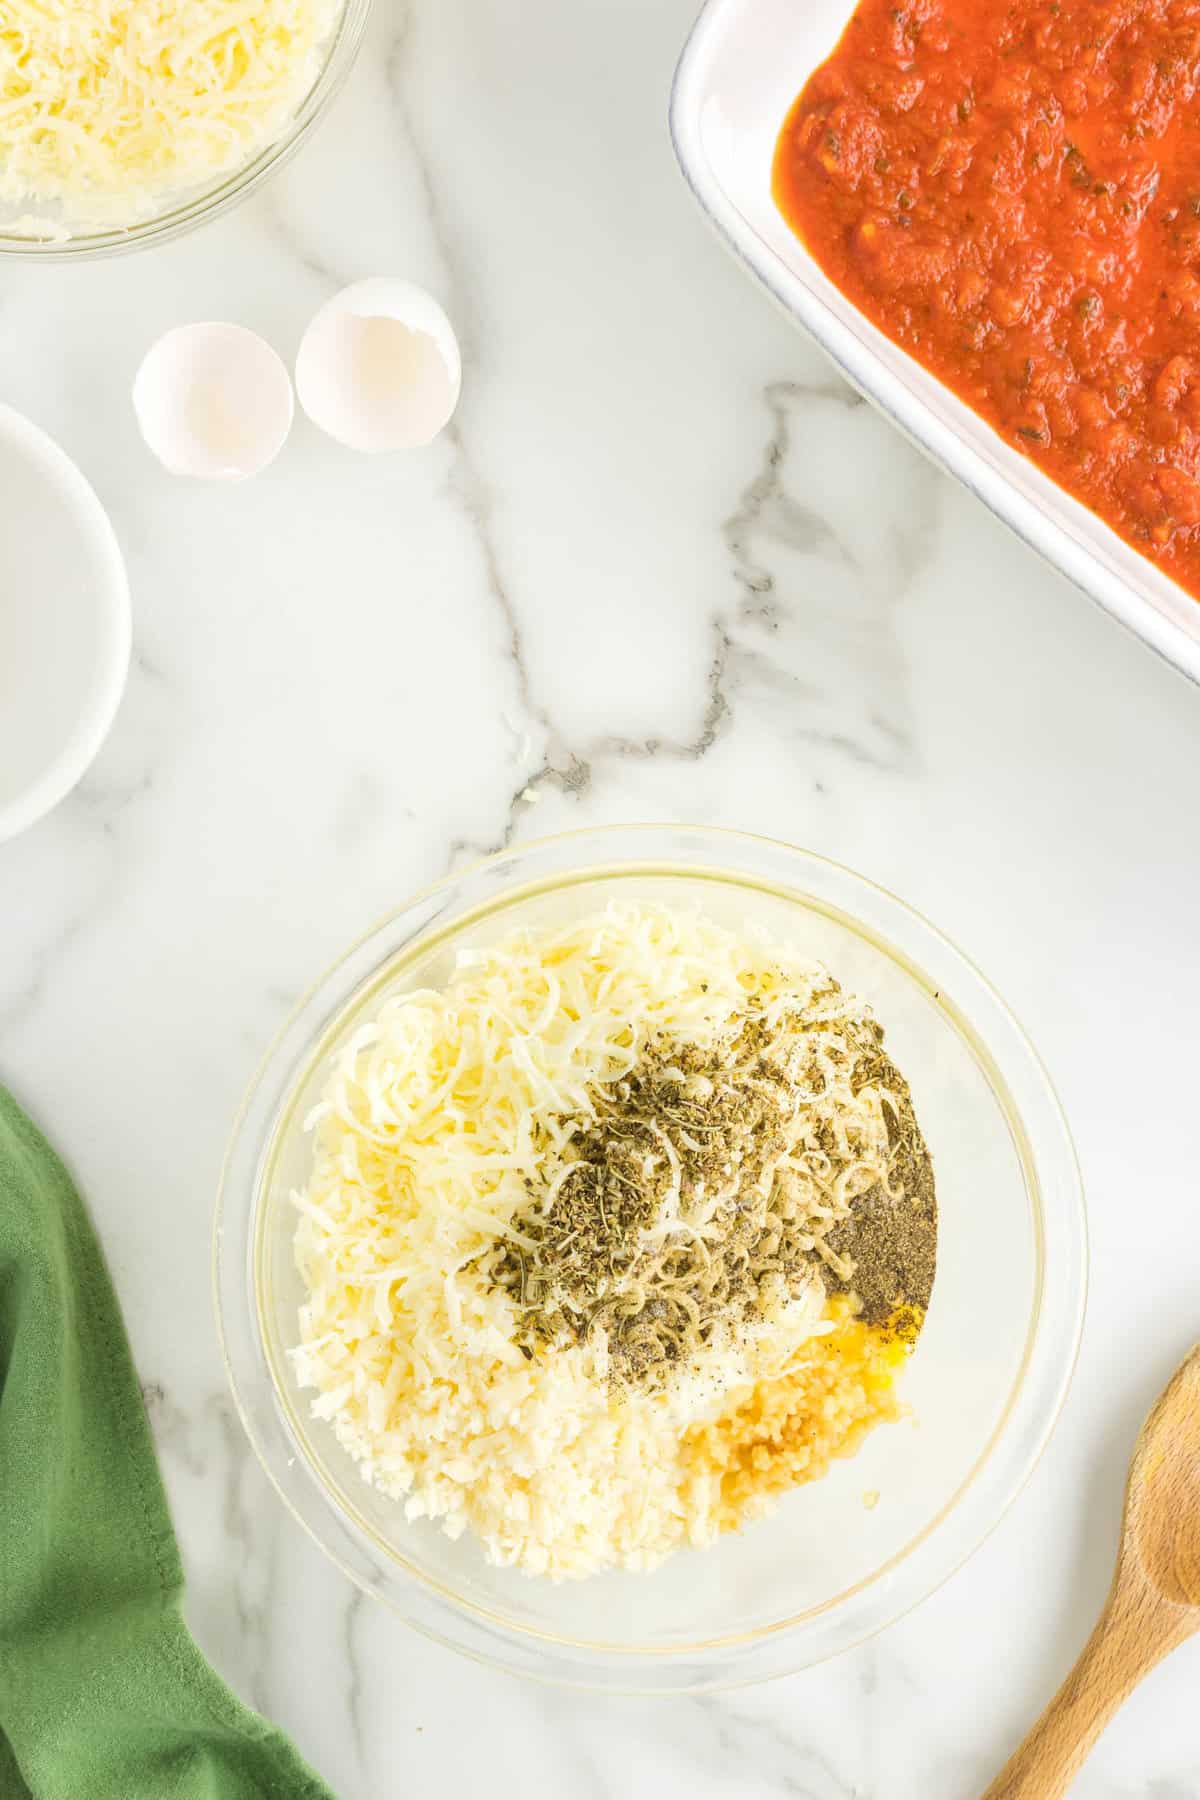 Combining the Cheesey Mixture in Mixing Bowl for Stuffed Shells